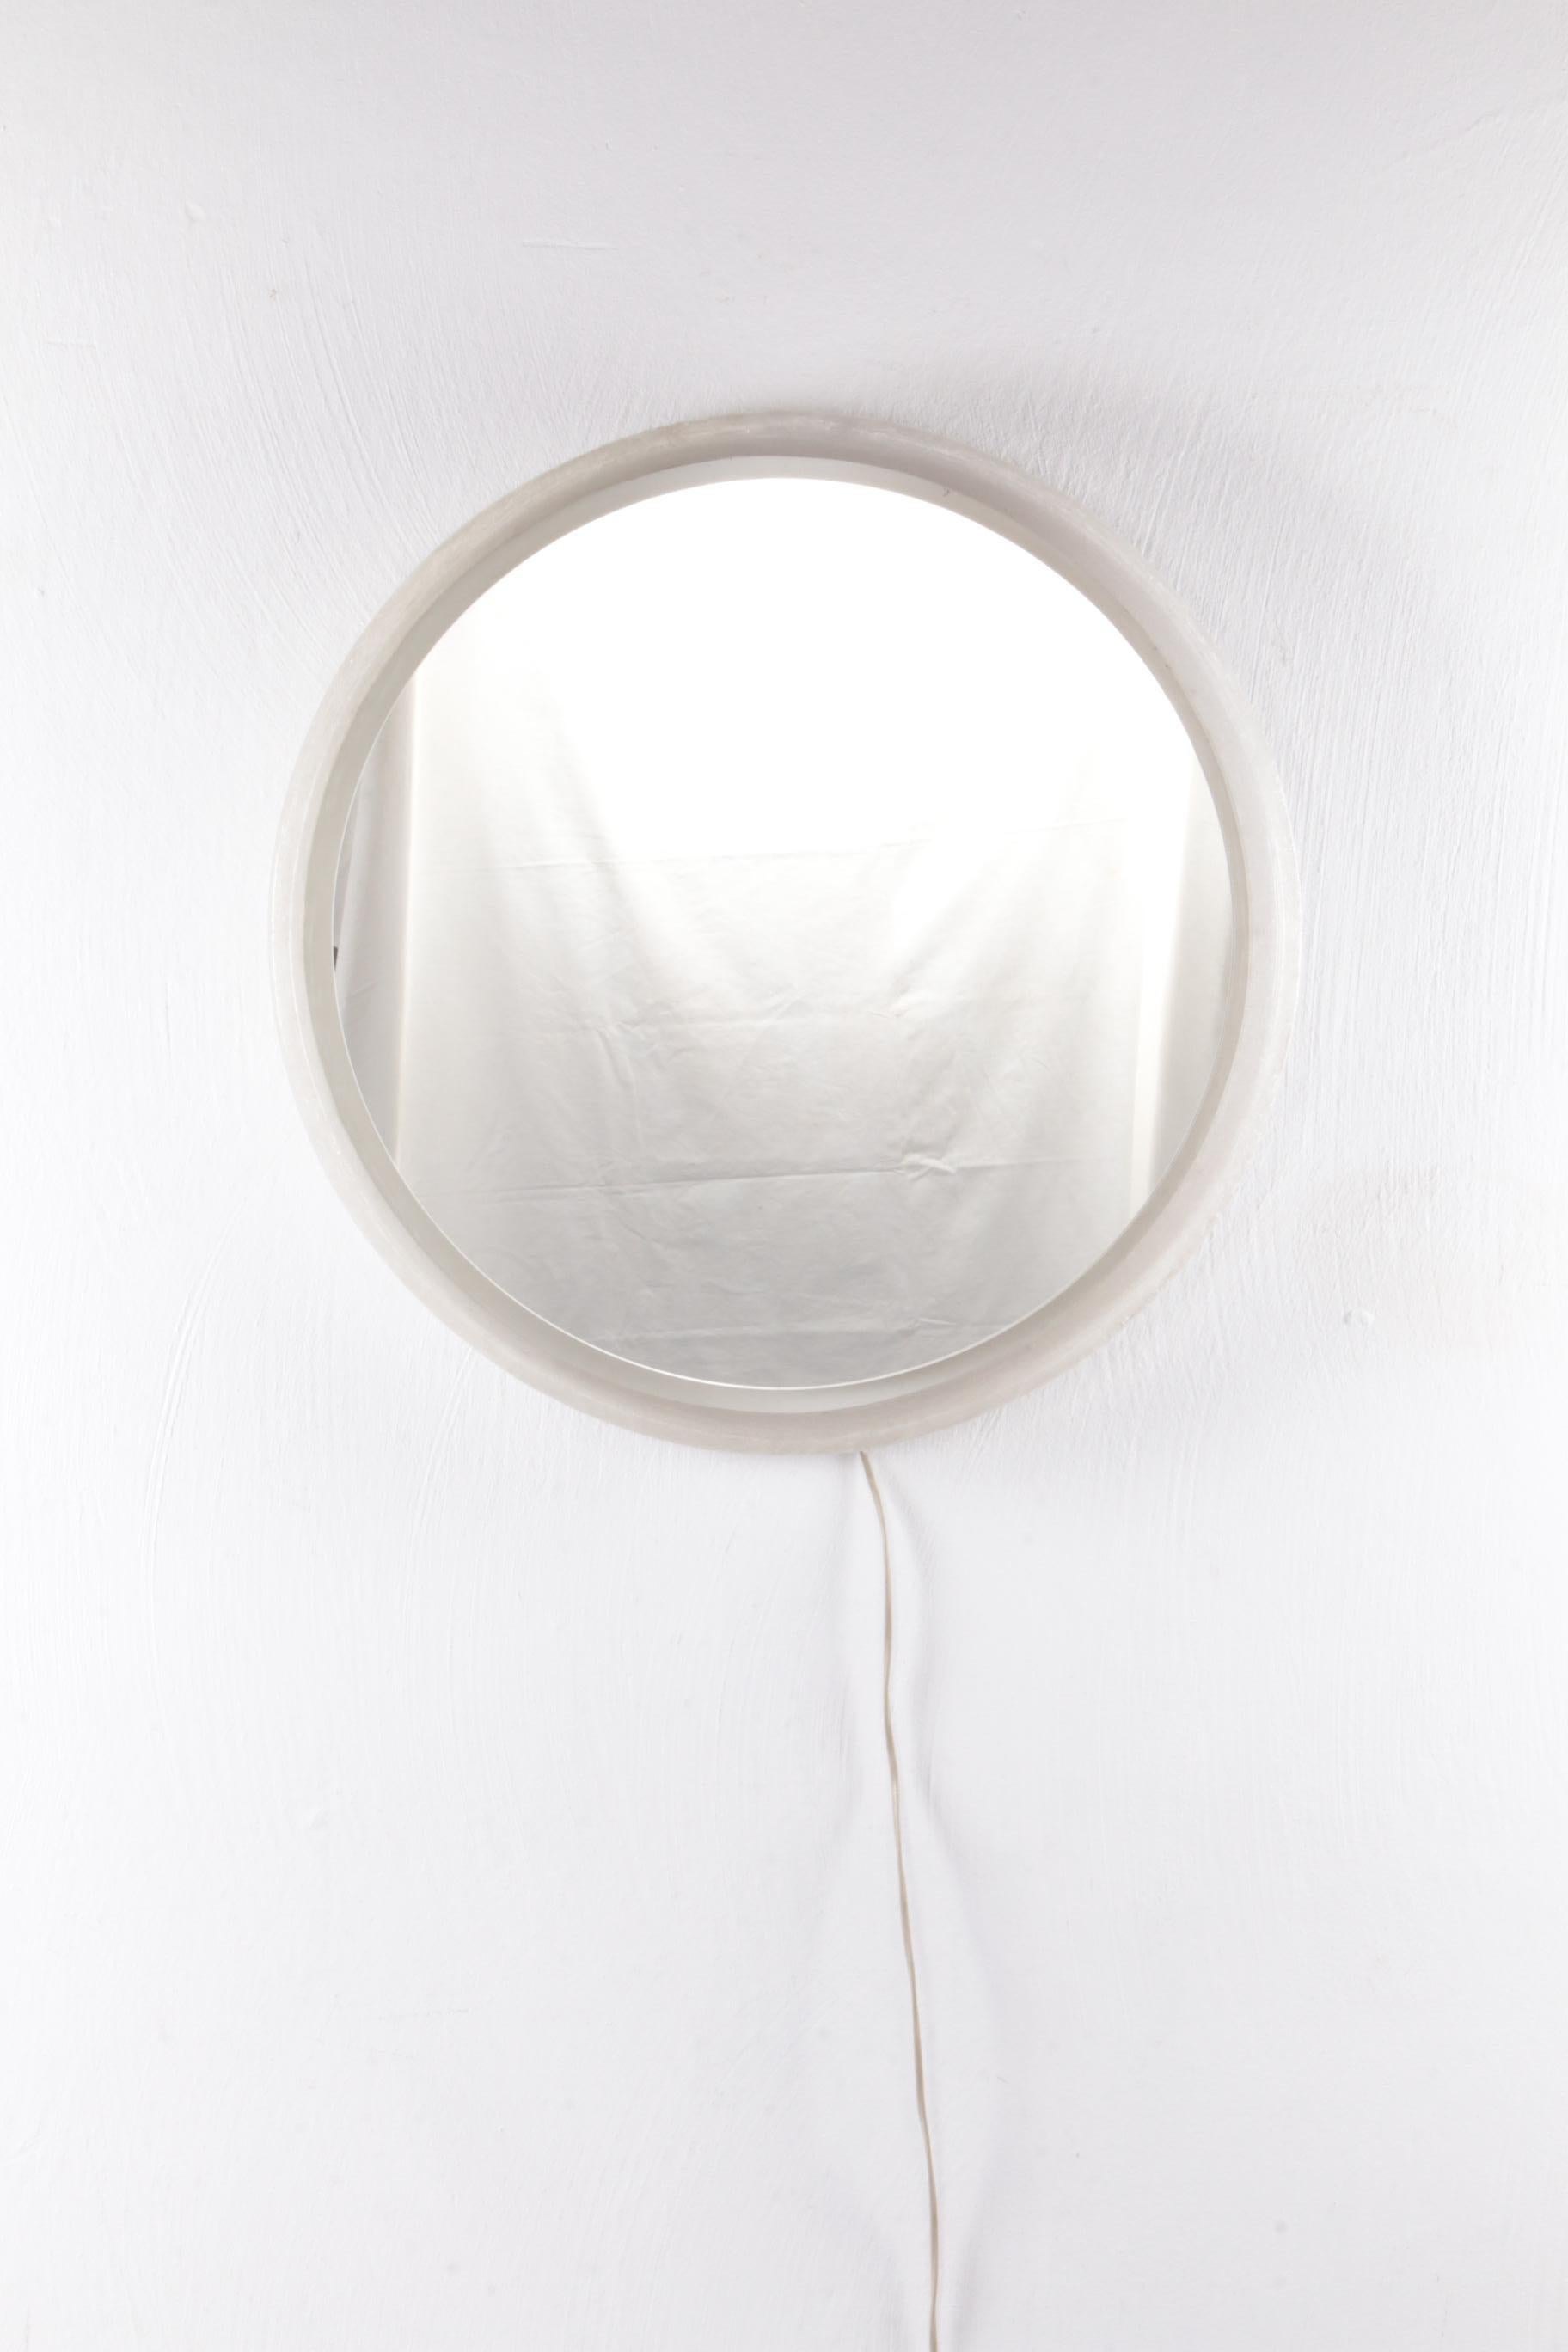 Round plexiglass Bathroom mirror by Hillebrand large model, 1960 Germany


The round mirror by Hillebrand is made of metal with plexiglass and was produced in the 1960s.

The mirror has interior lighting which emits a warm soft light when it is